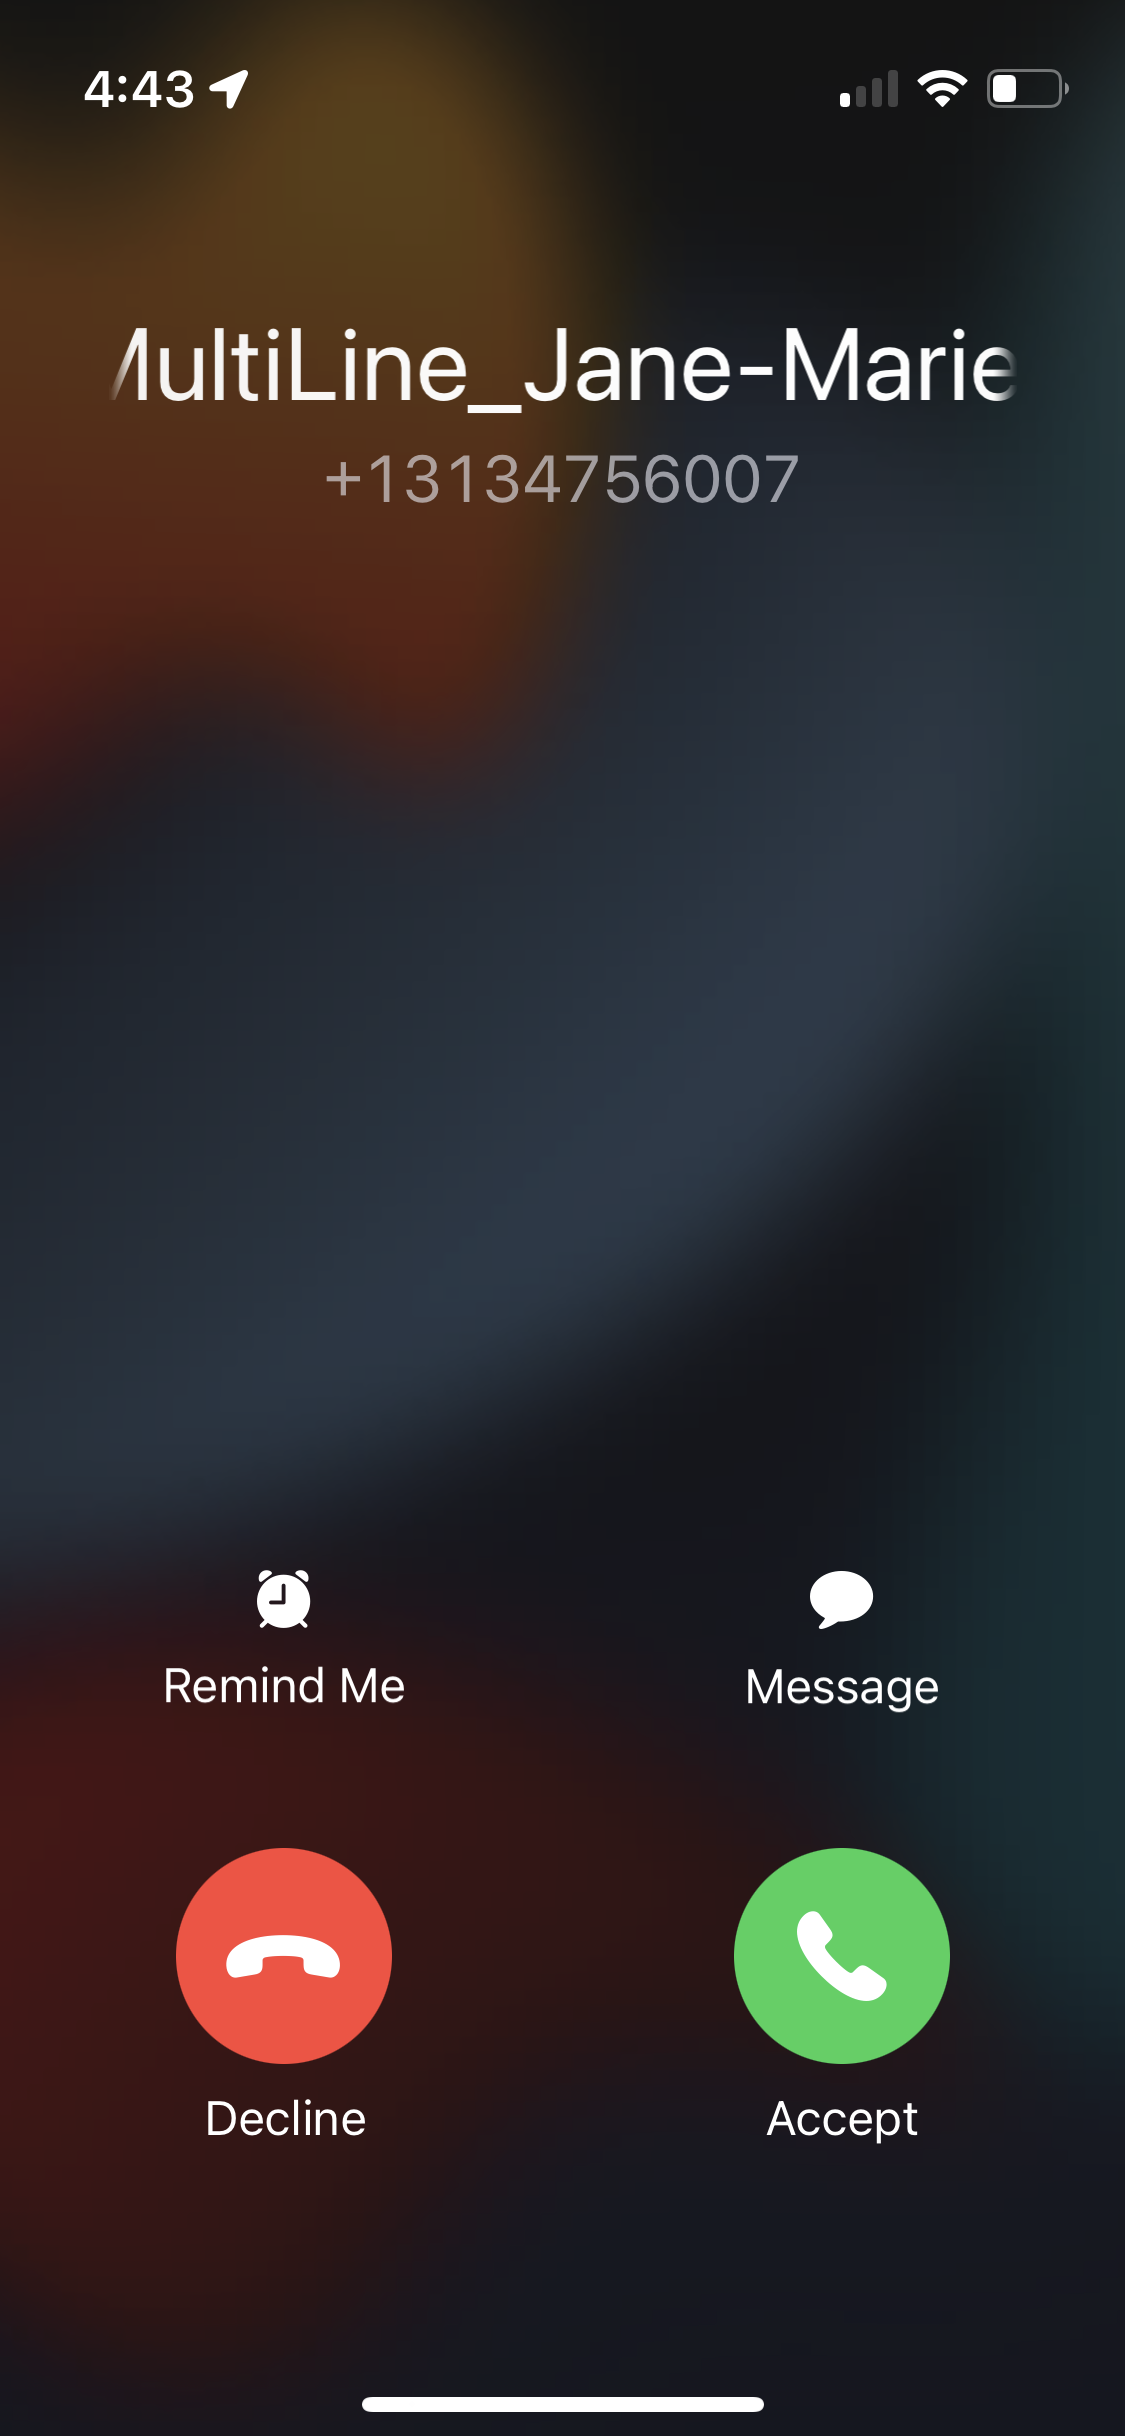 incoming call minutes mode screen